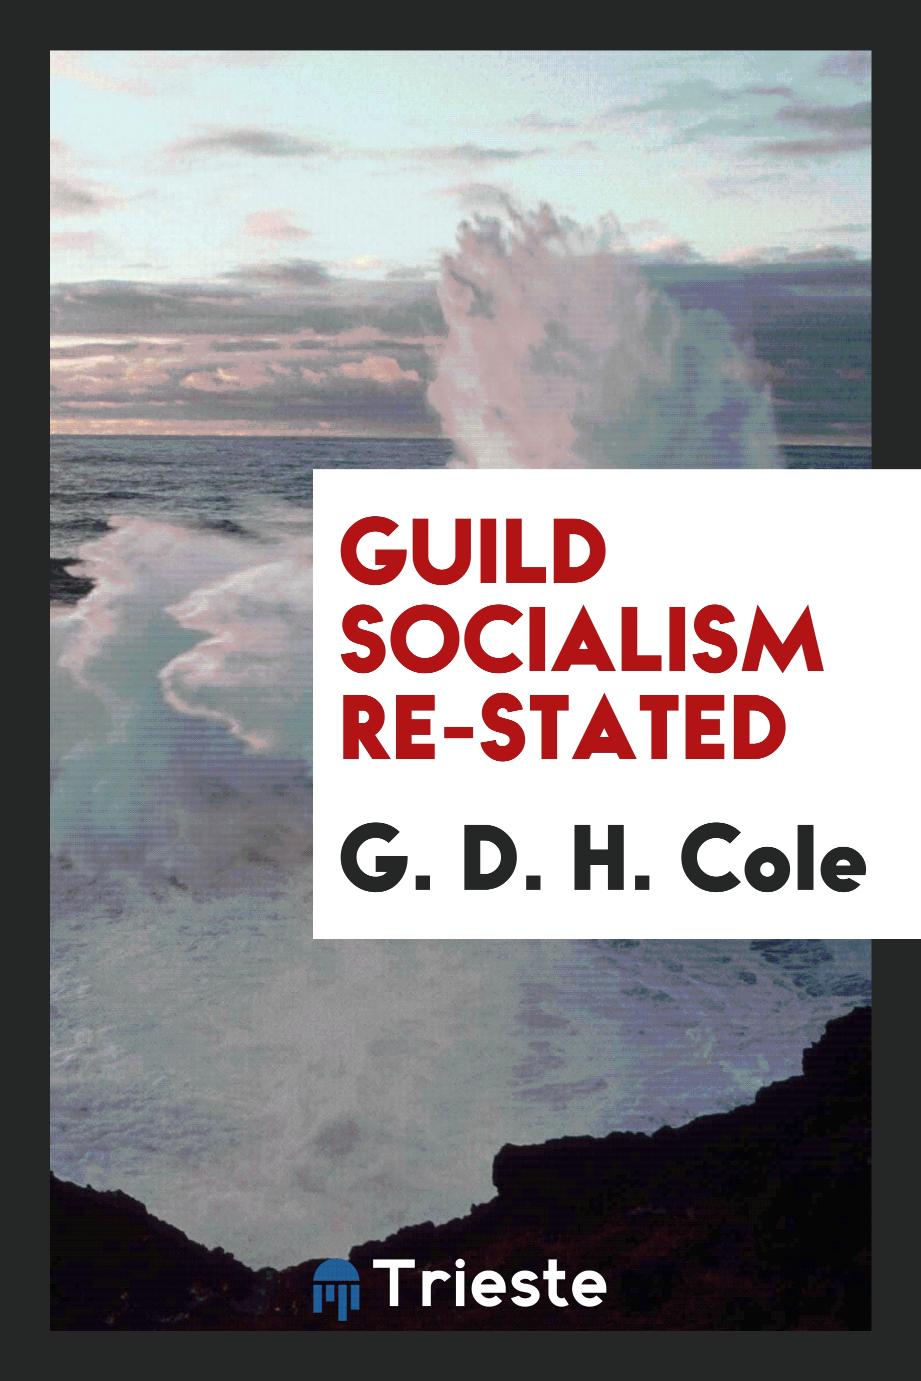 Guild socialism re-stated